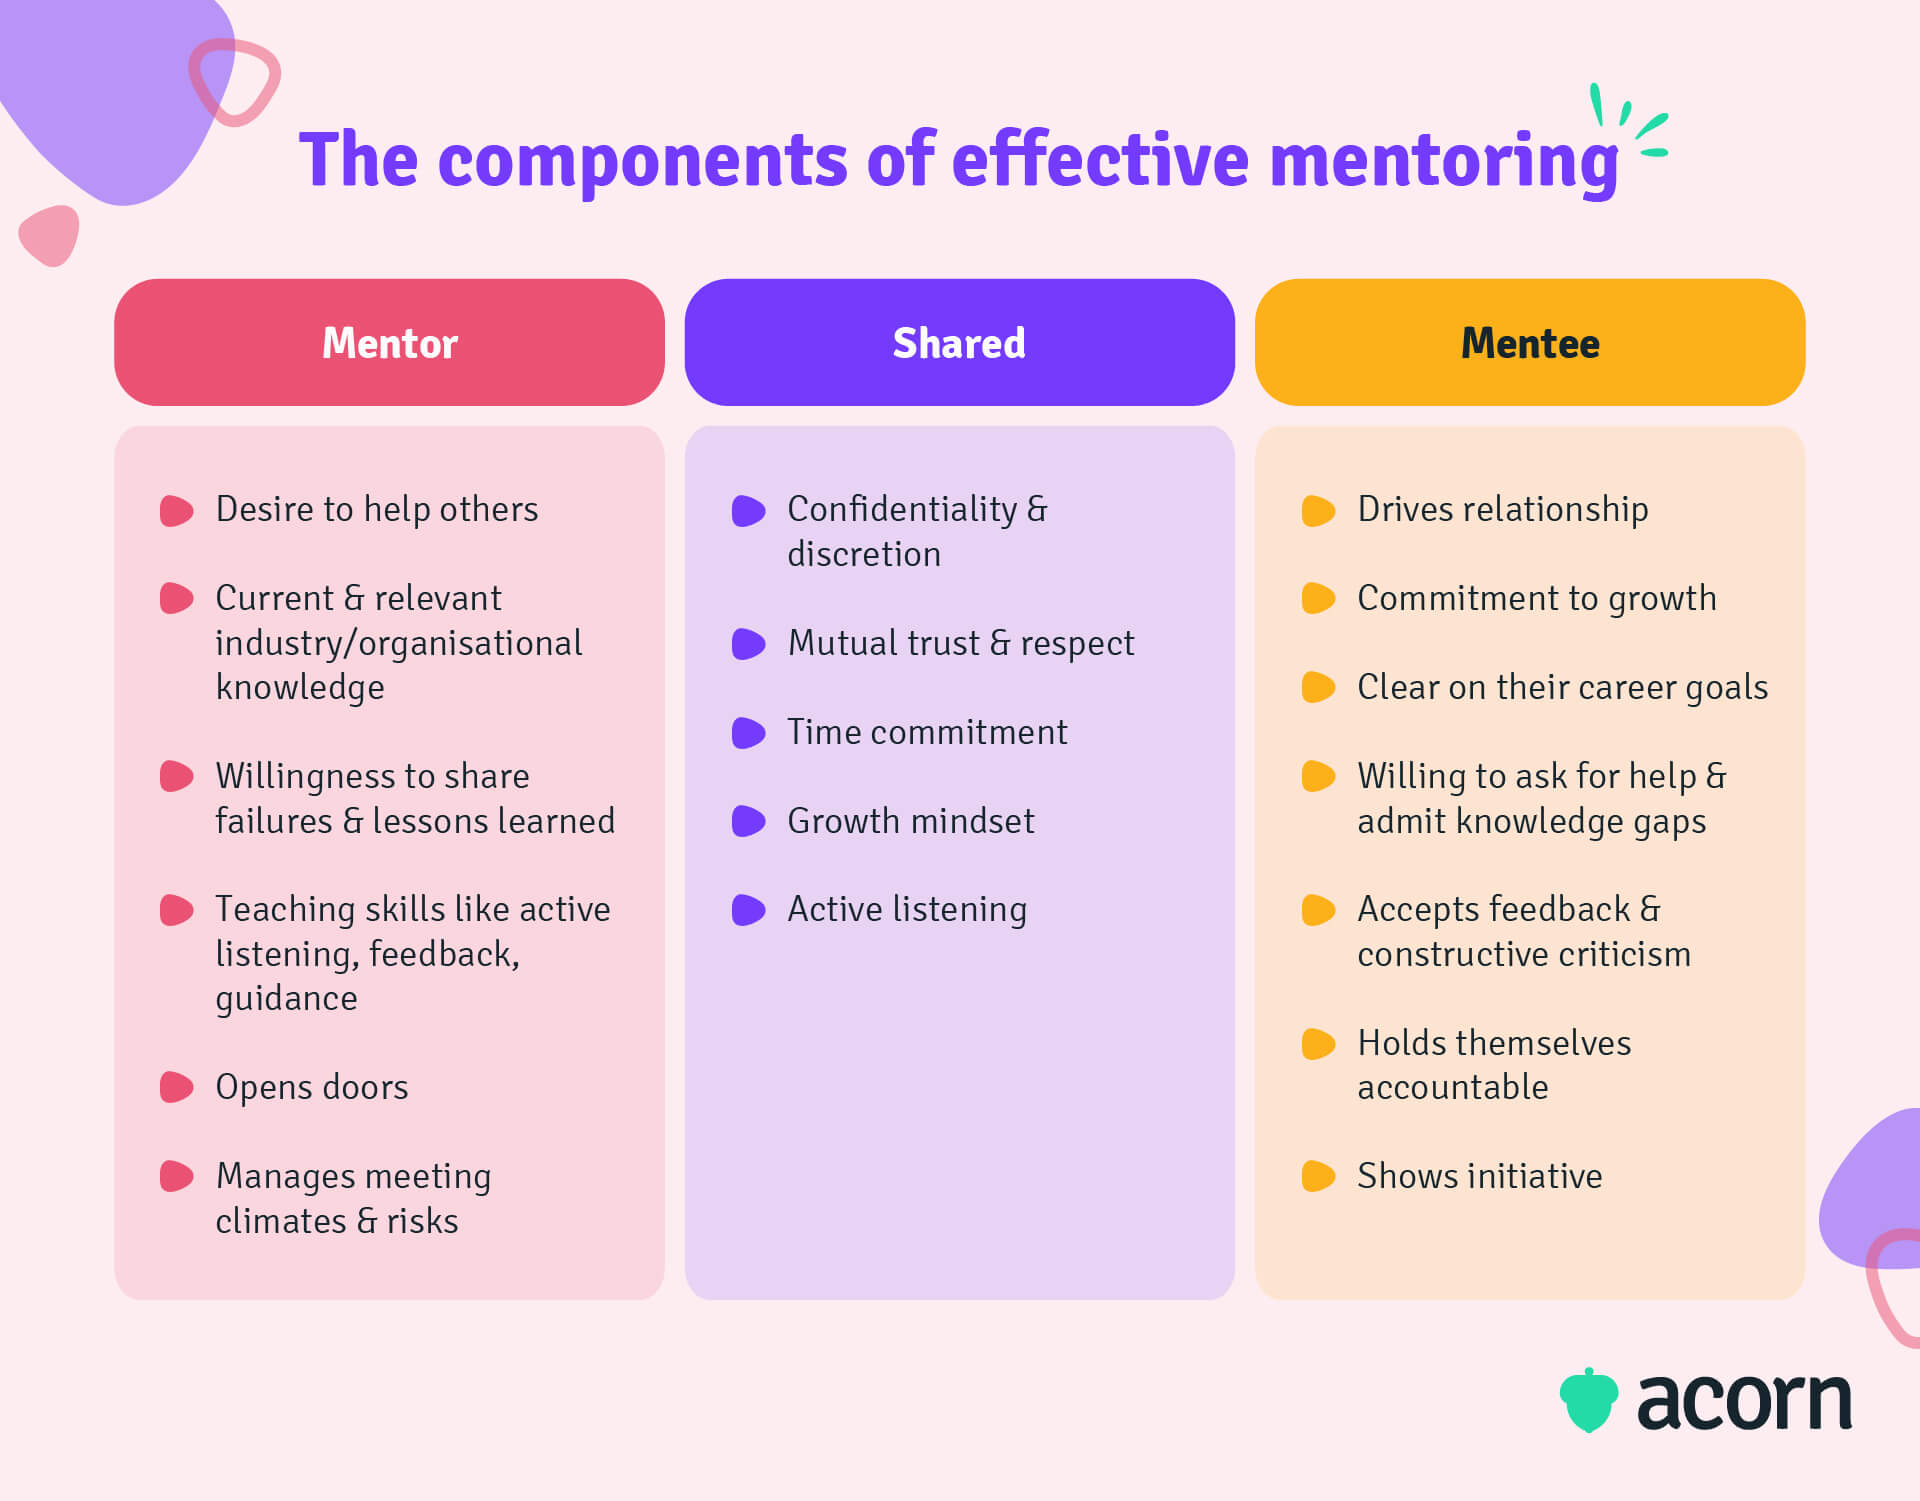 Table showing the shared and individual components of effective mentoring for mentors and mentees